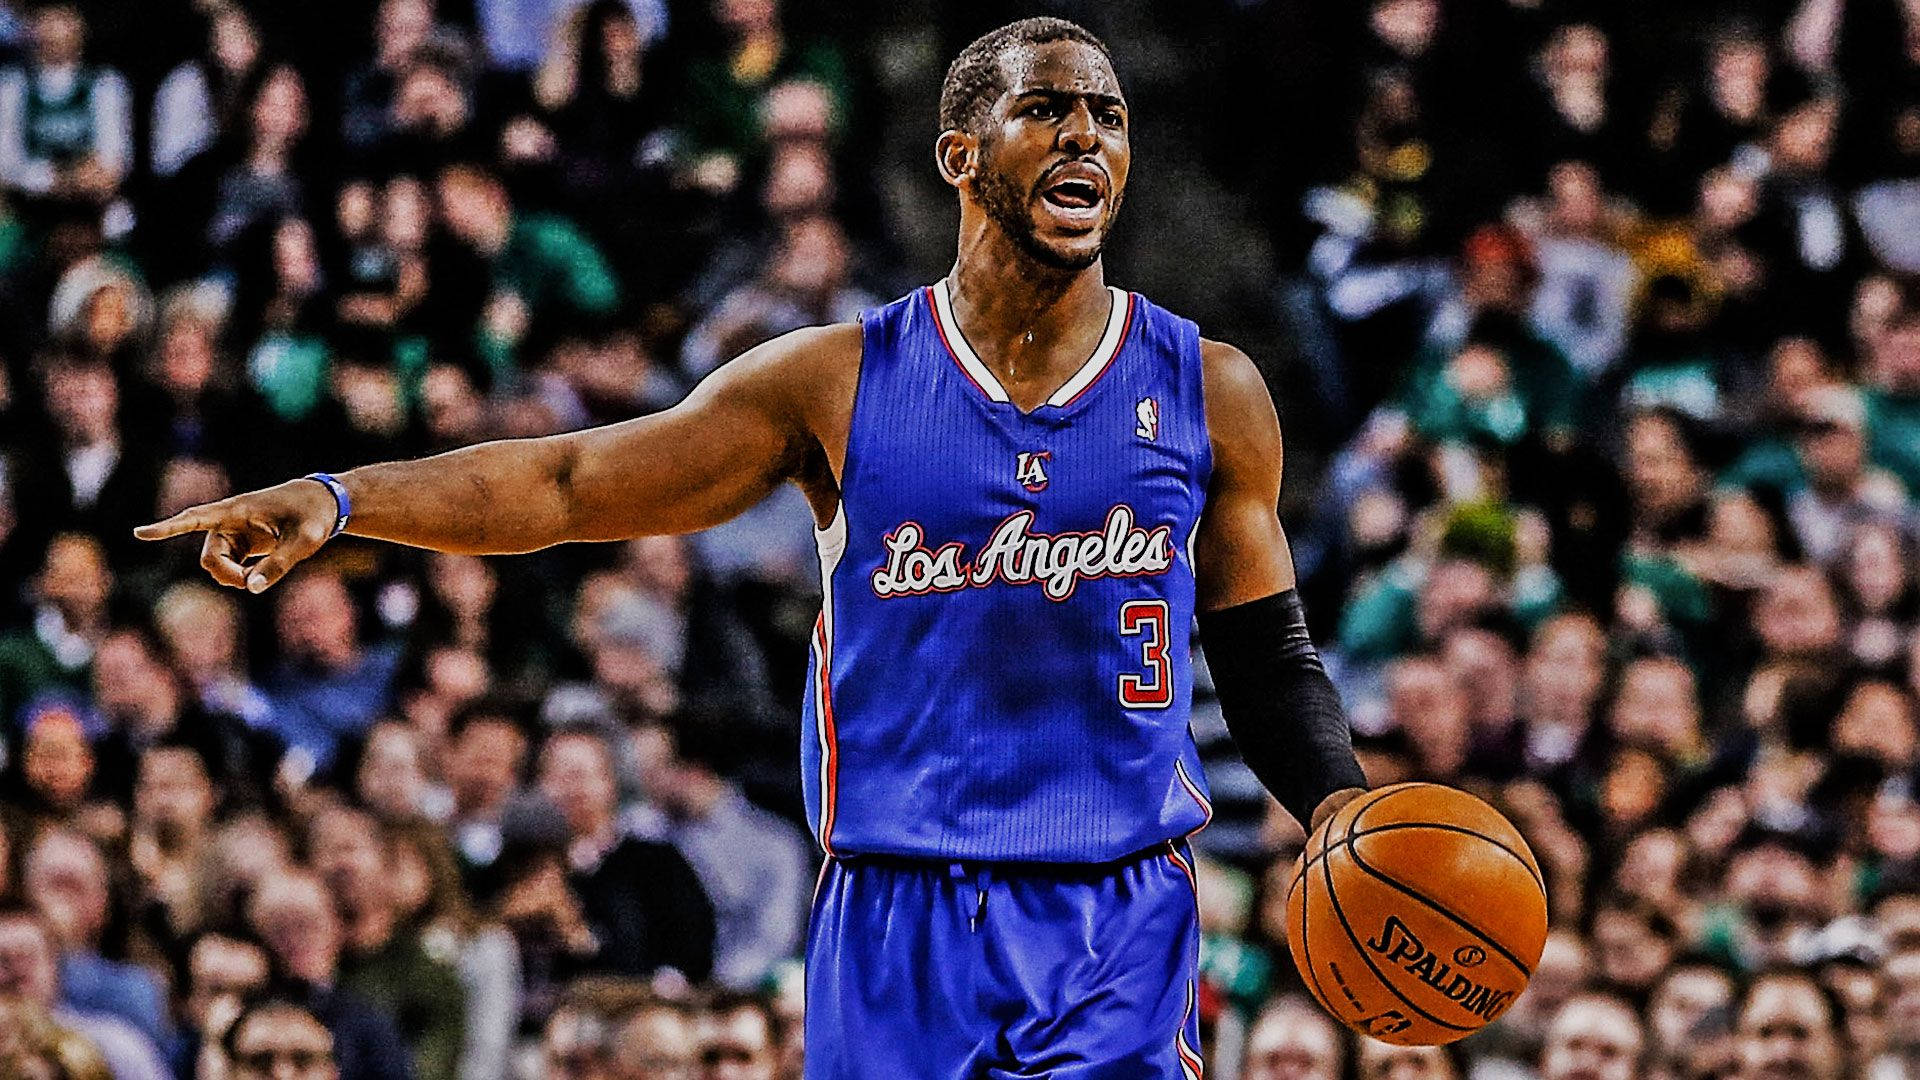 Chris Paul Dribbling Pointers Background